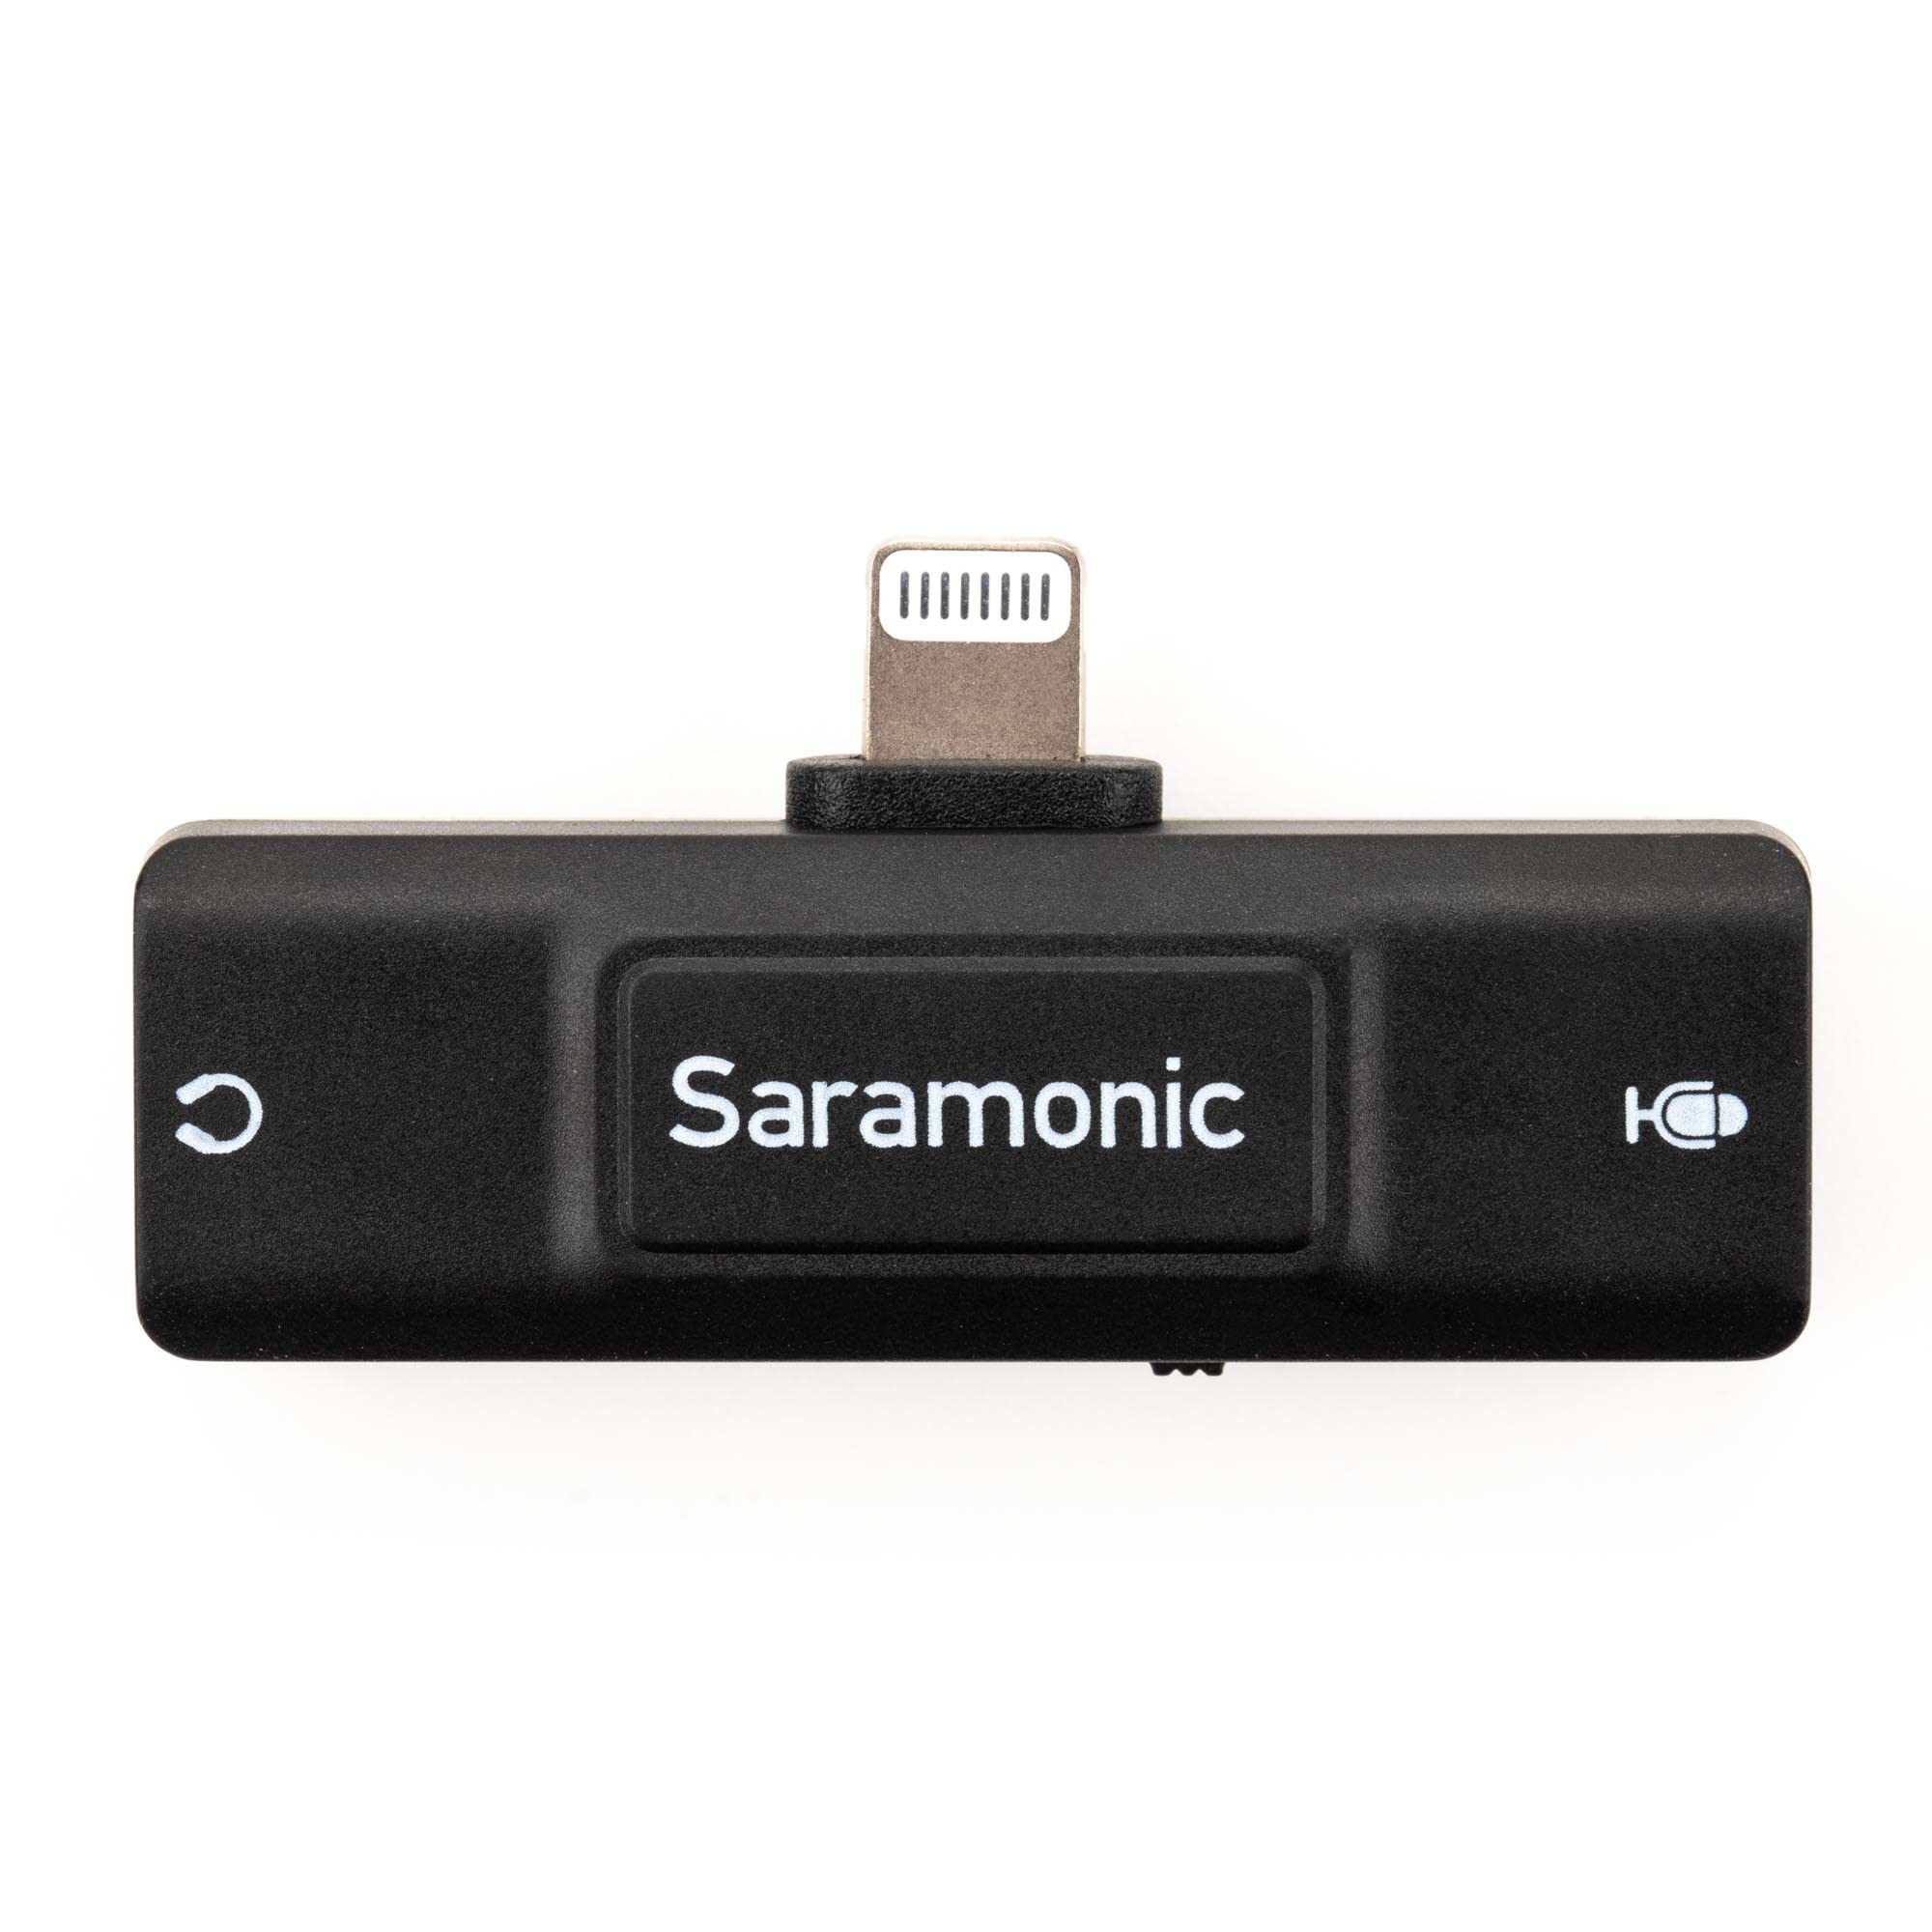 Saramonic SR-EA2D Lightning Audio Interface with 3.5mm TRS or TRRS Mic Input and 3.5mm Headphone Out for Apple iPhones and iPads with Lightning, Black